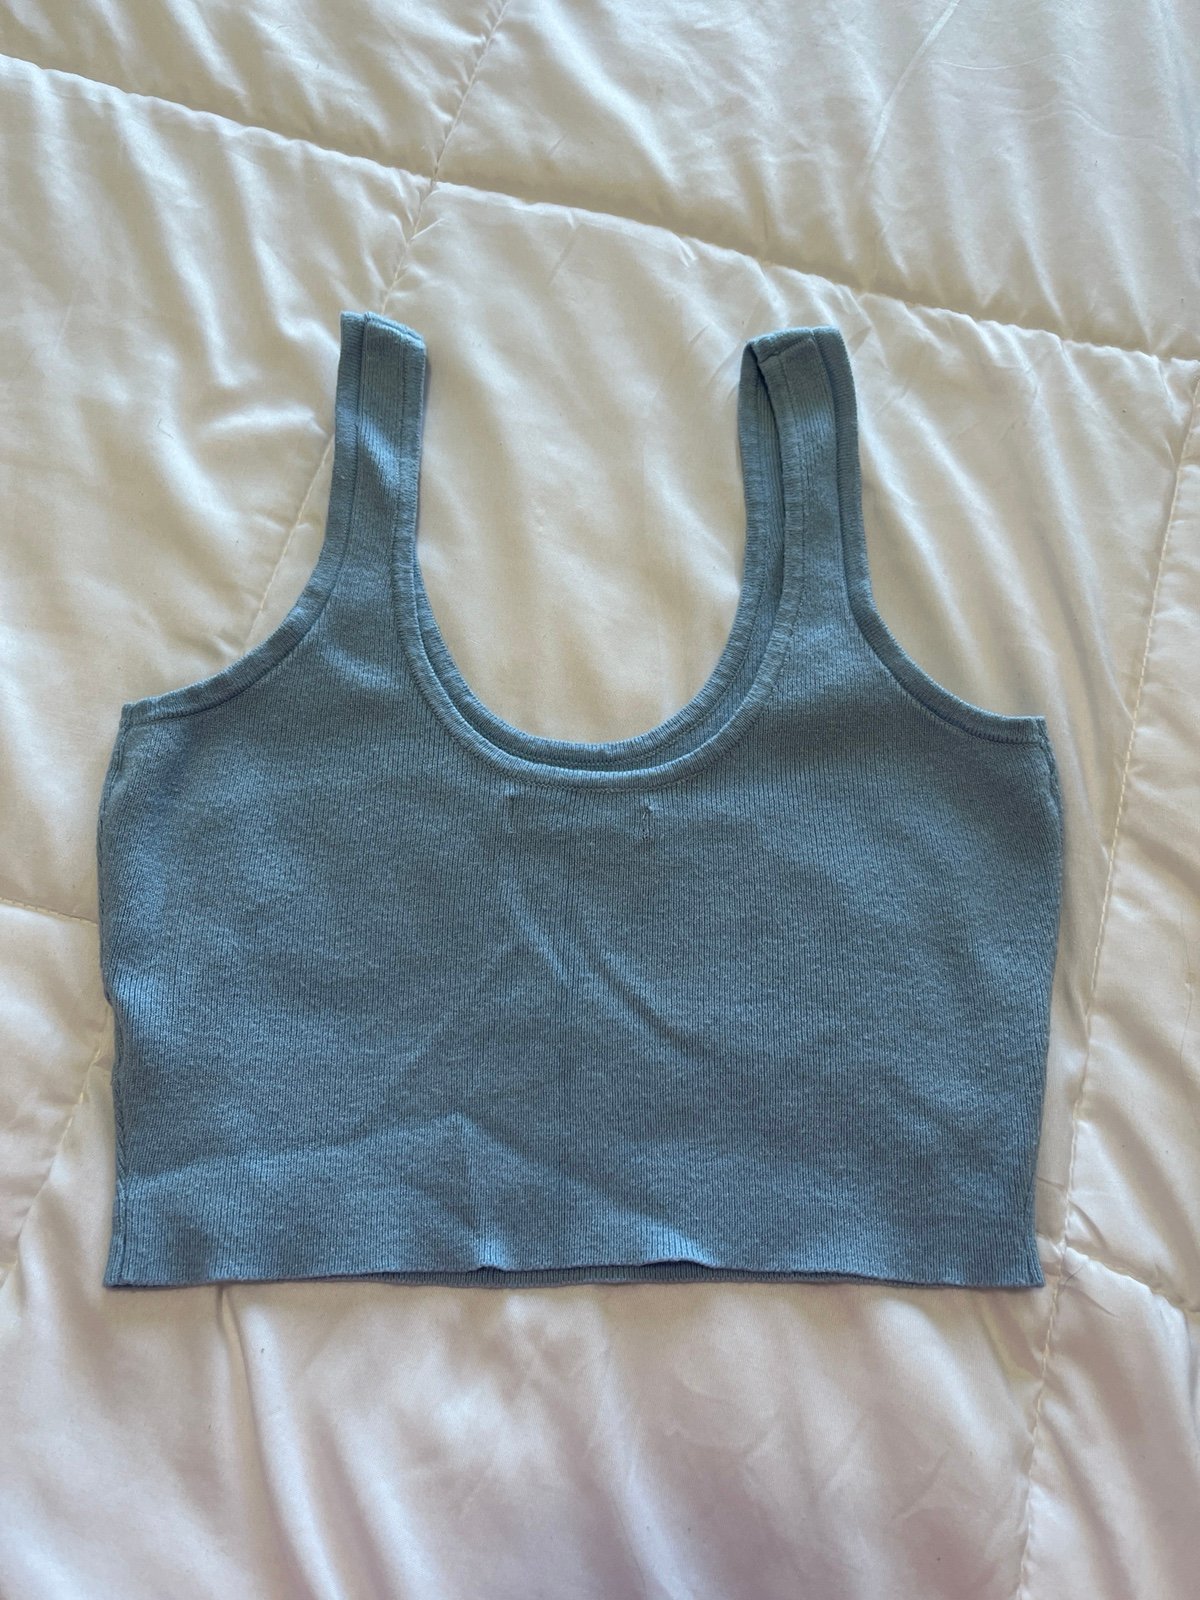 Popular kendall and kylie knit tank Oaok4Dd6T Cool